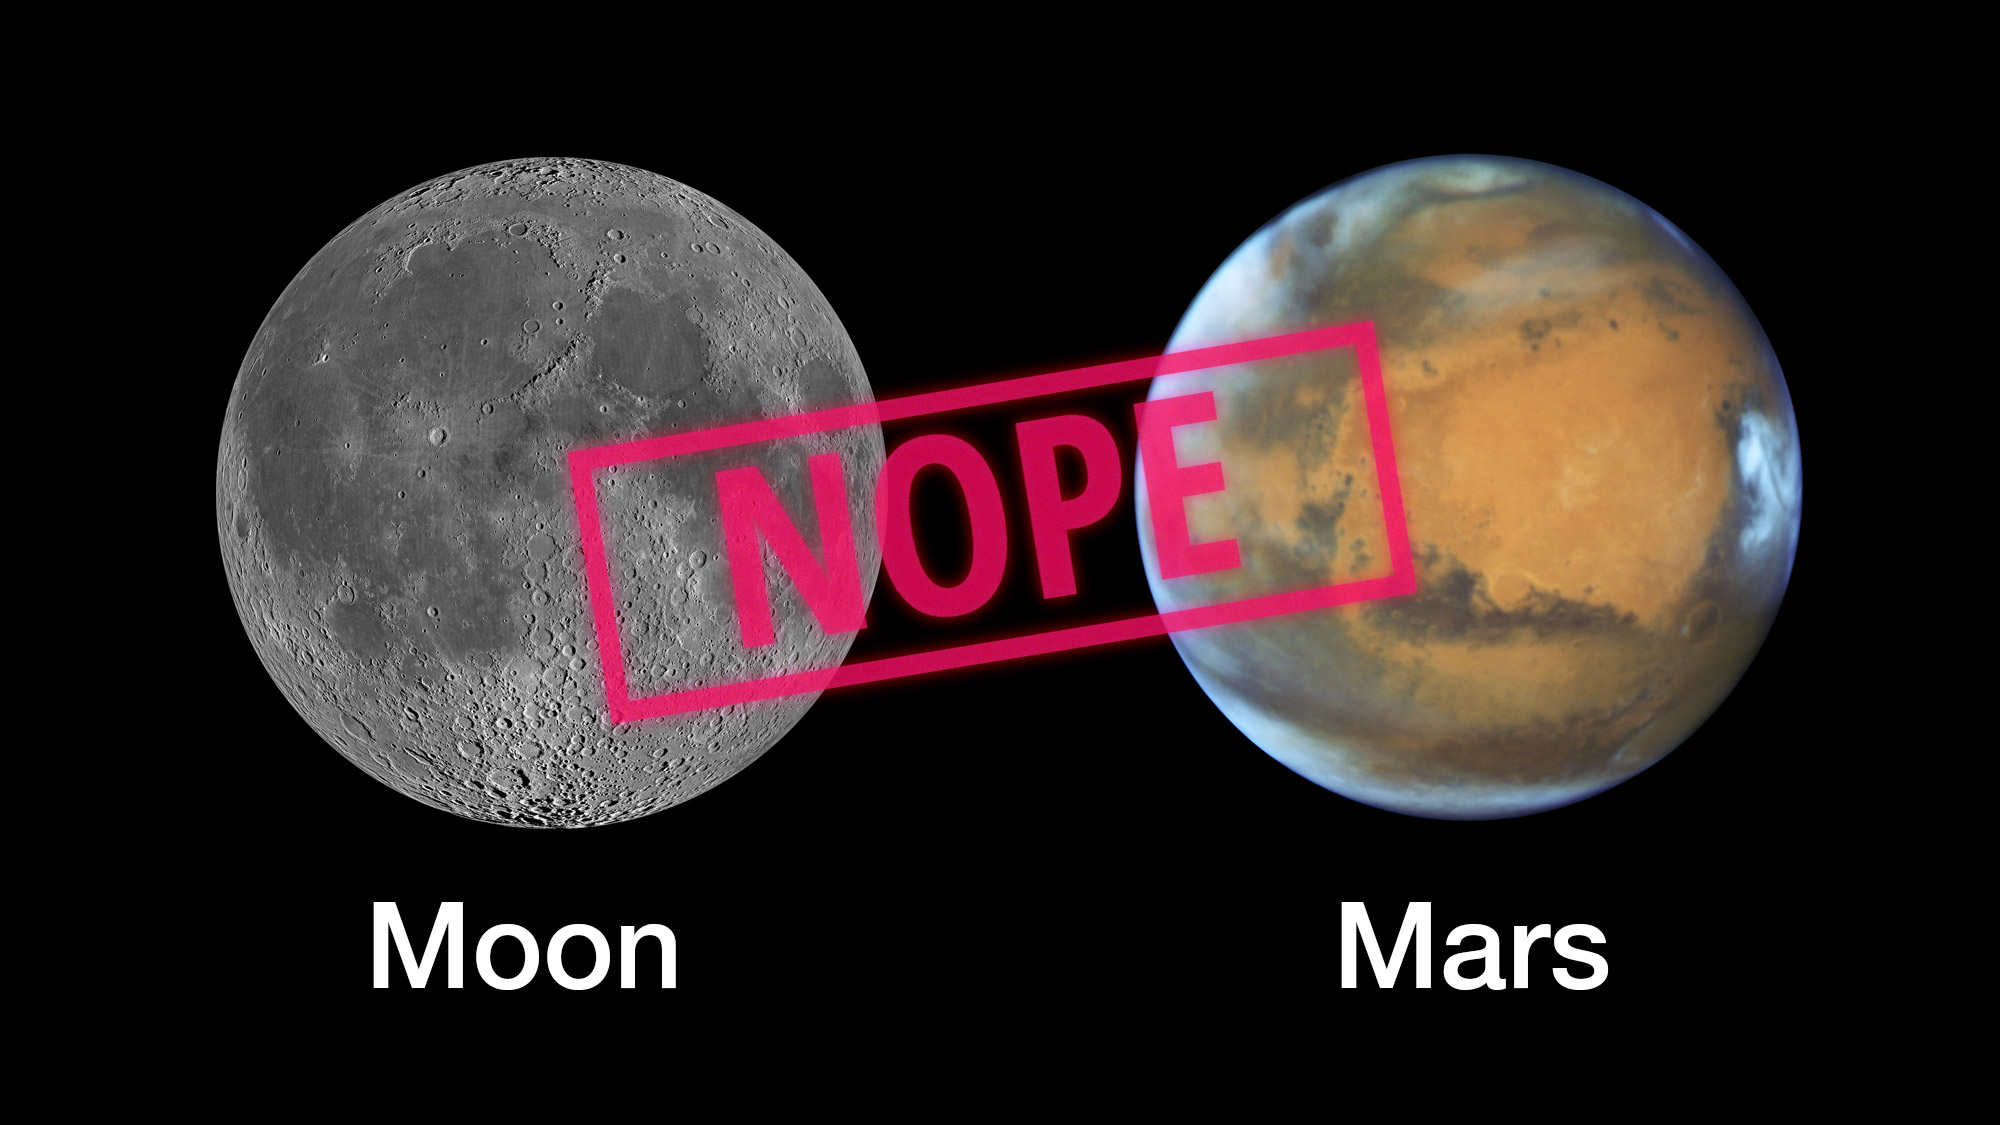 Mars will never look as large as the full moon in the night sky.